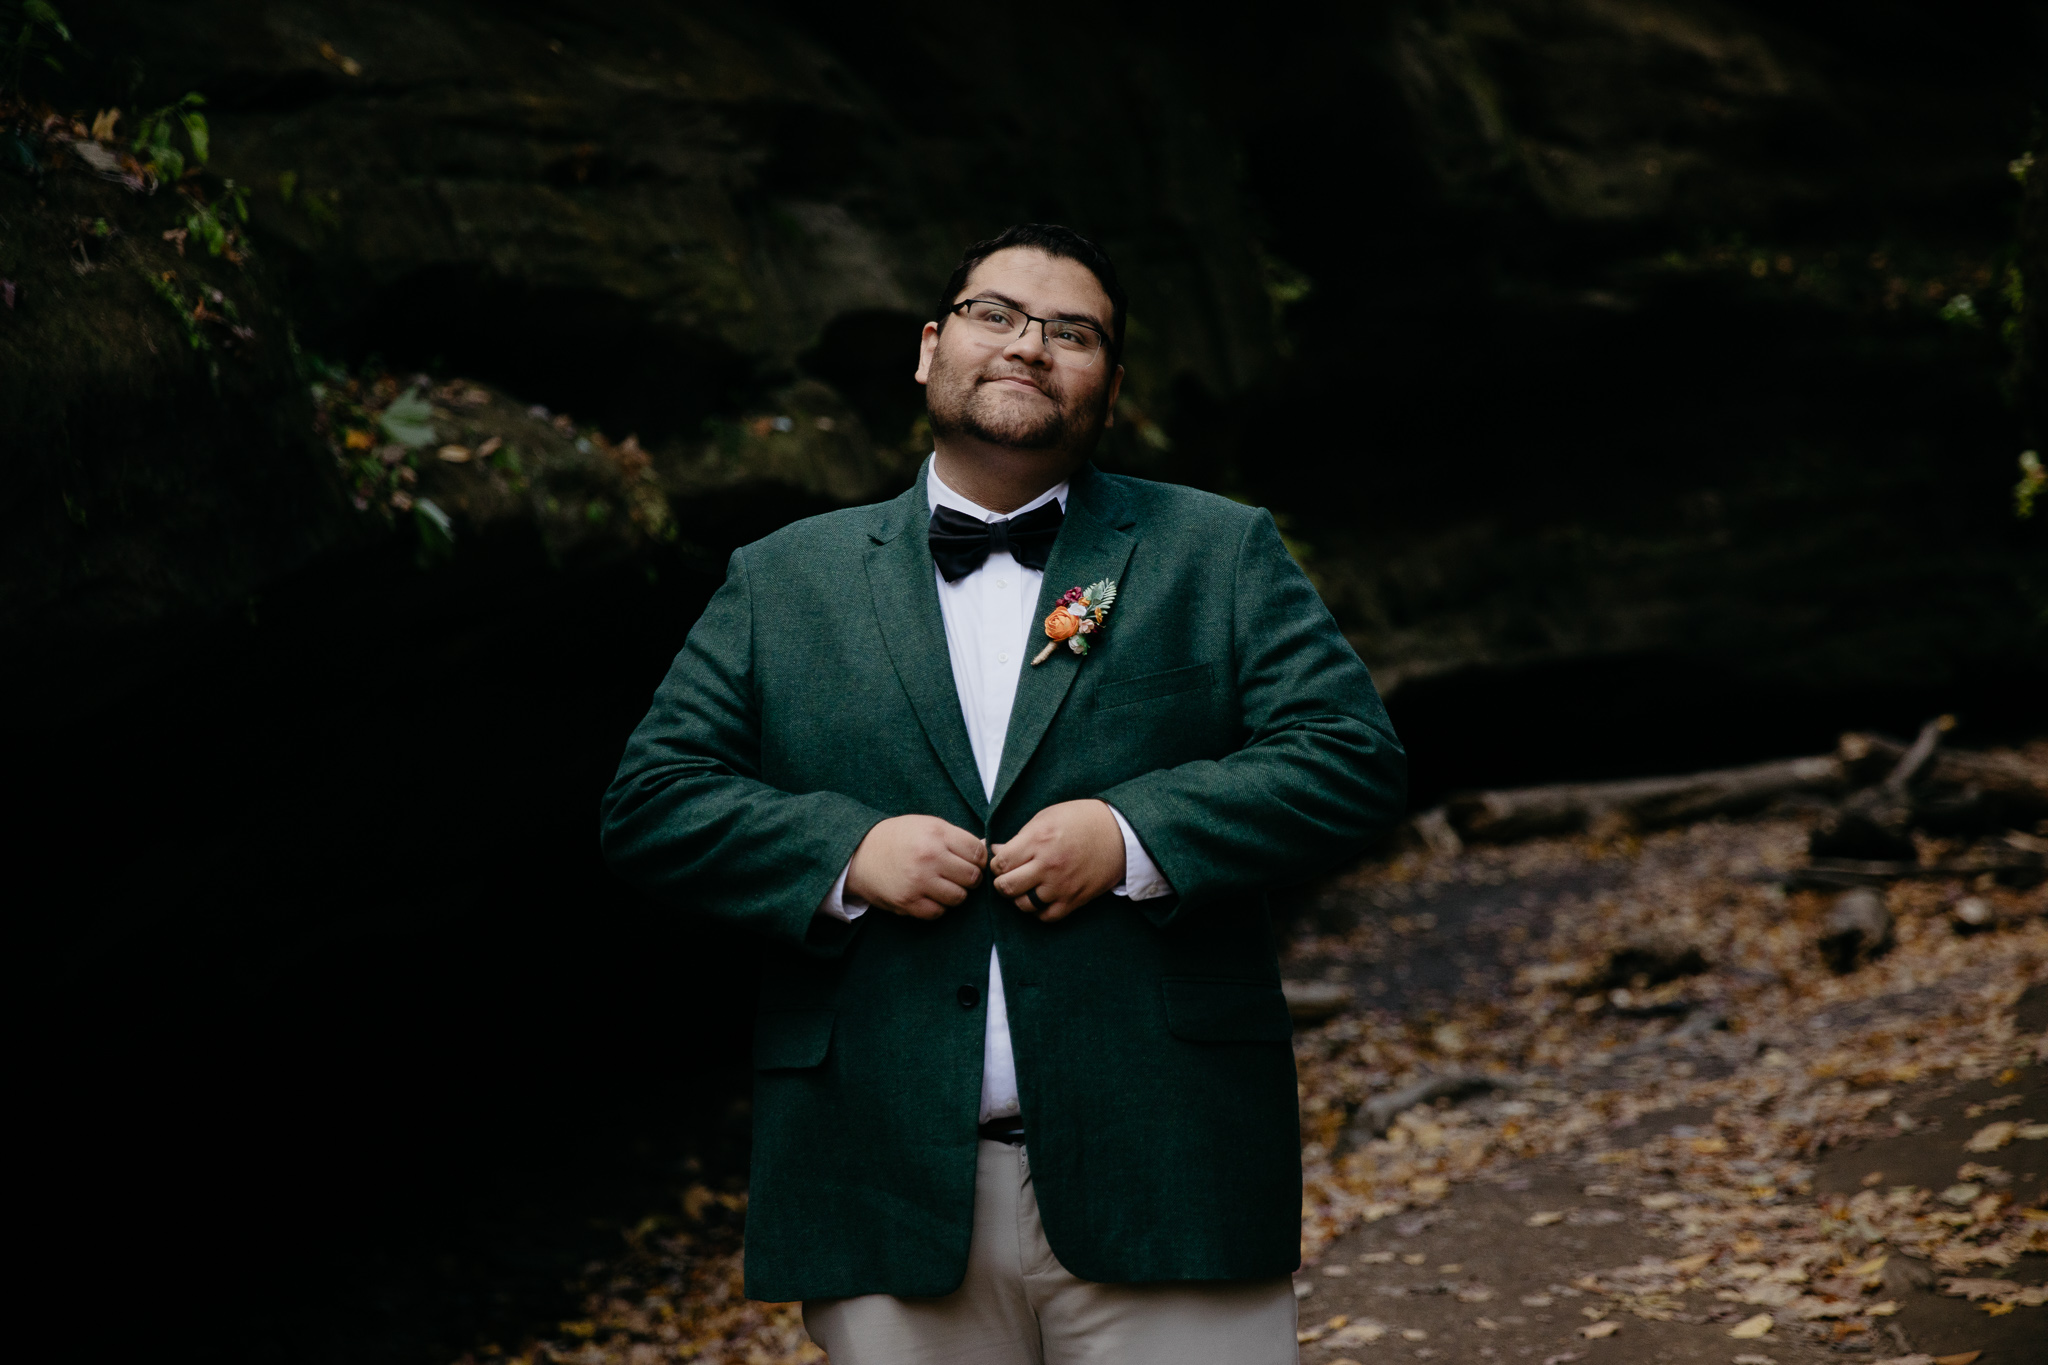 A groom standing in Bear Canyon at Turkey Run State Park, Indiana